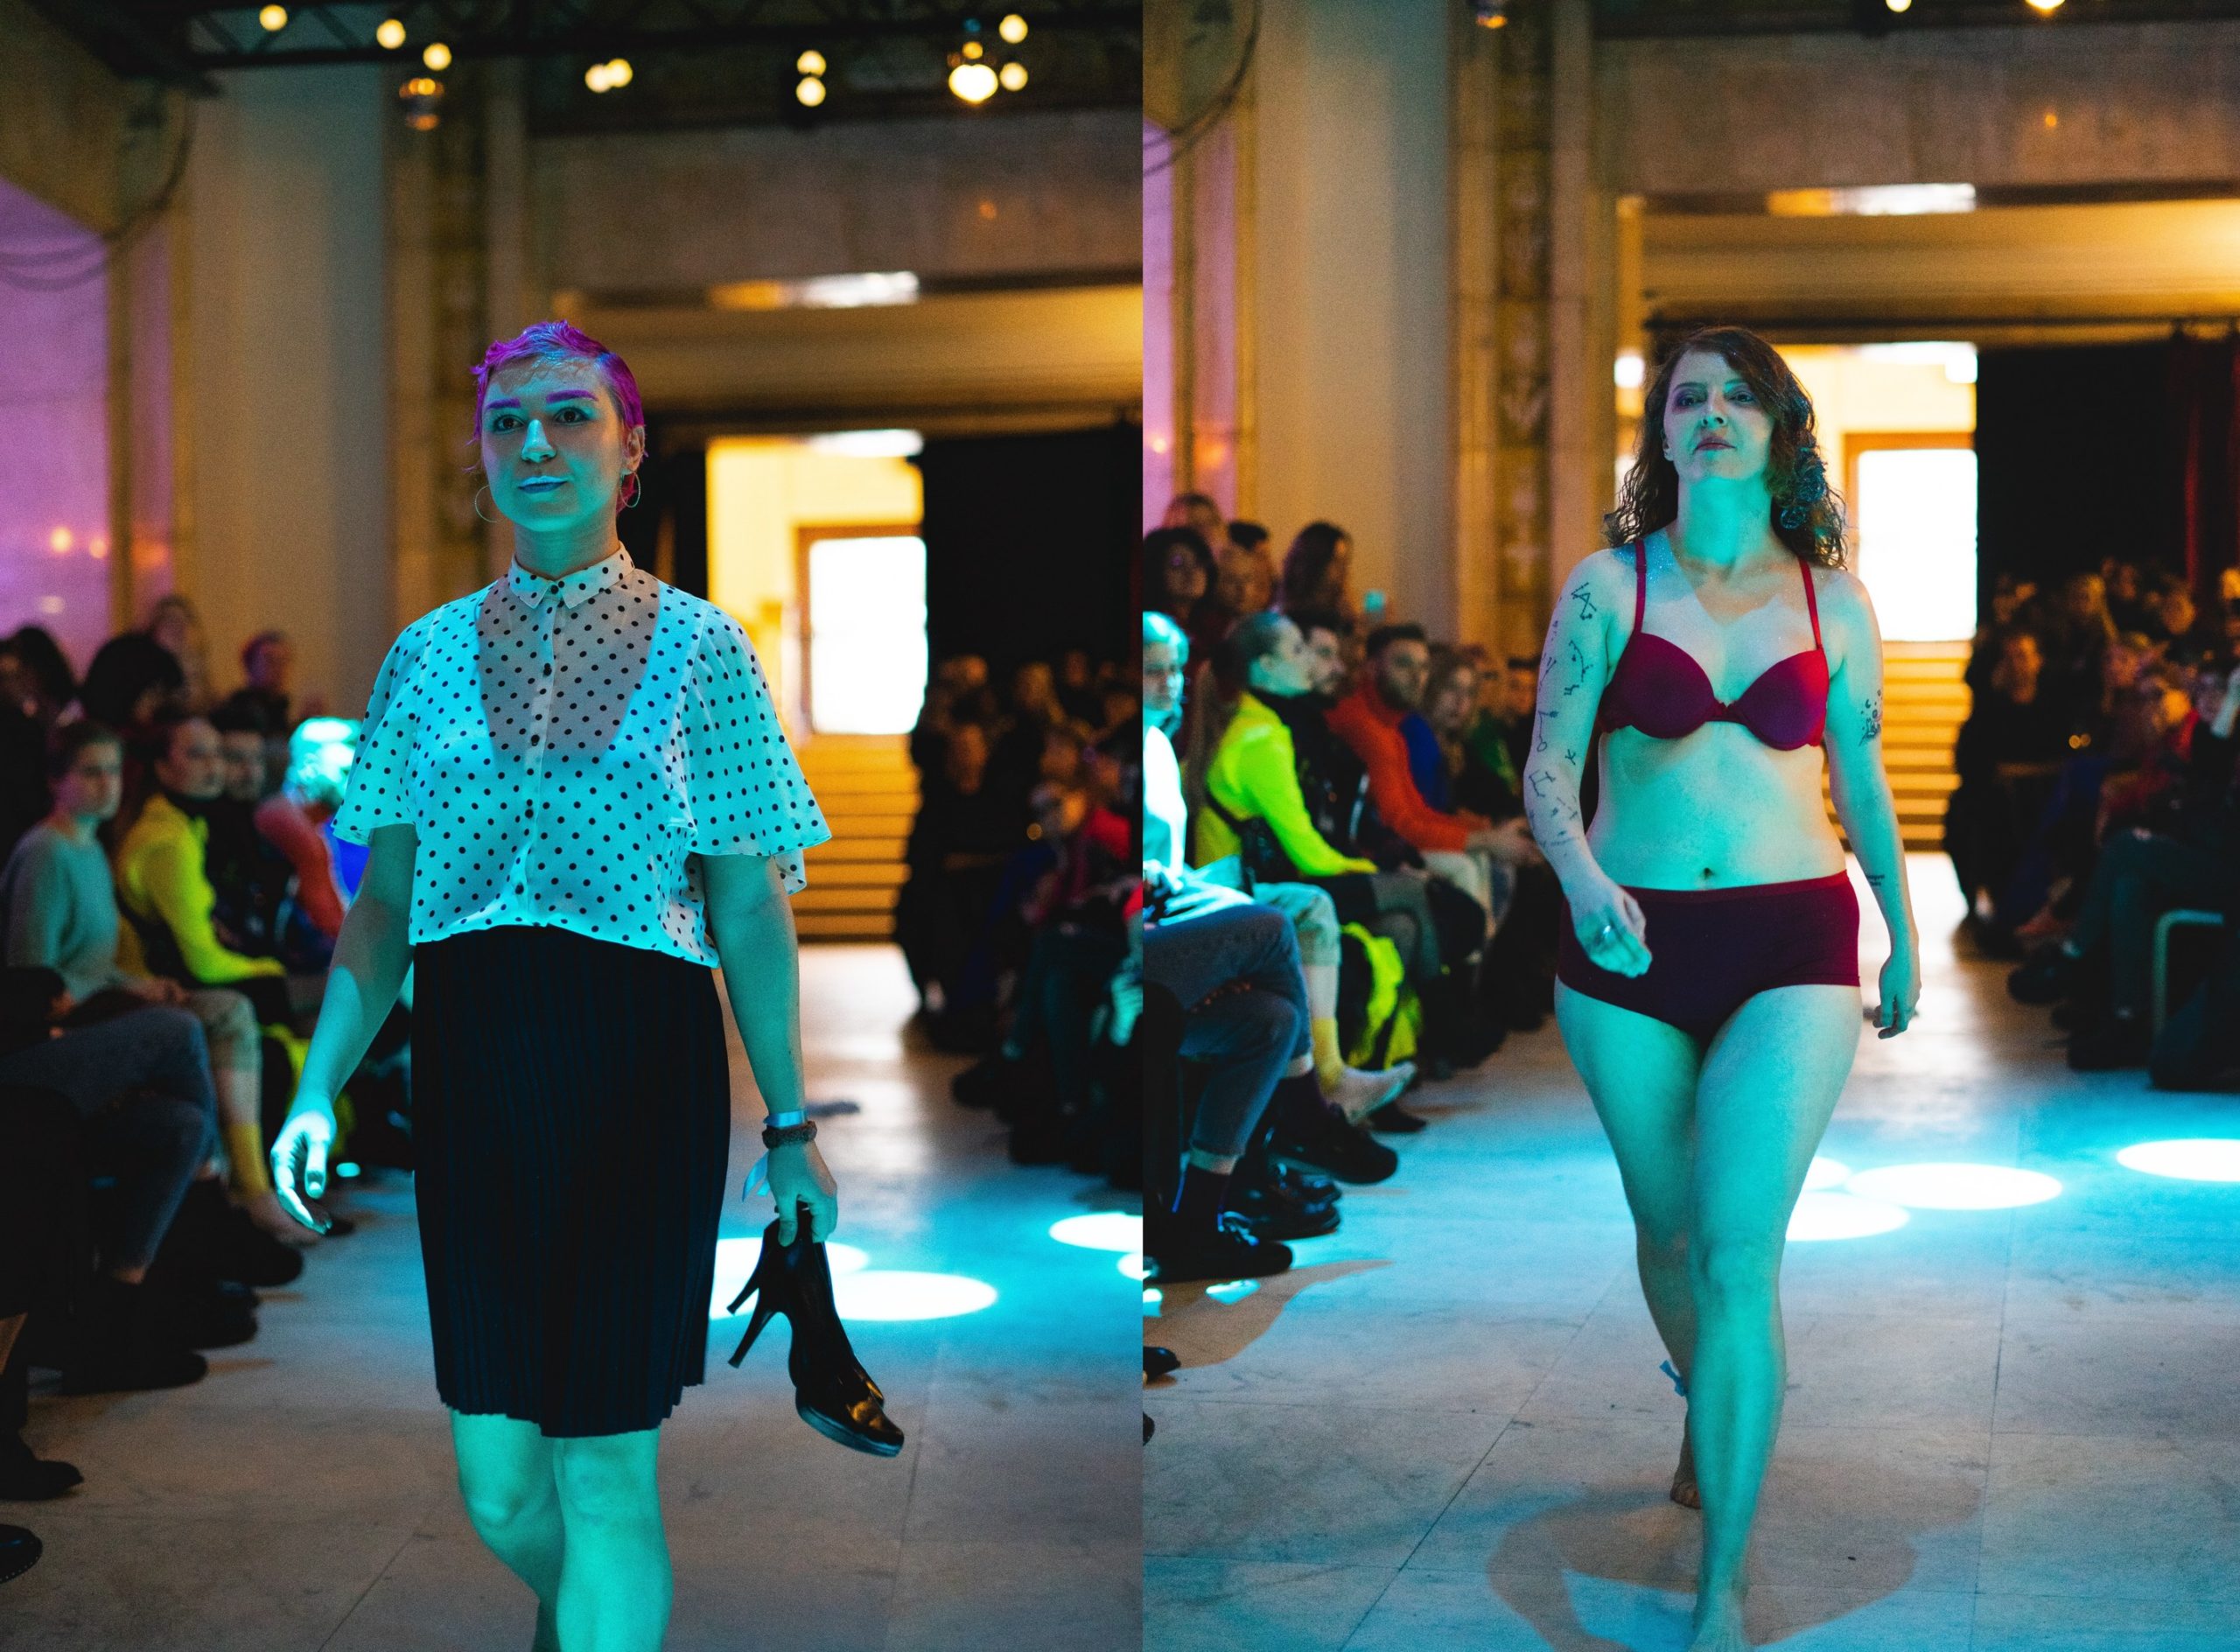 Rape survivors hold fashion show in clothes they were wearing during assaults Notes From Poland